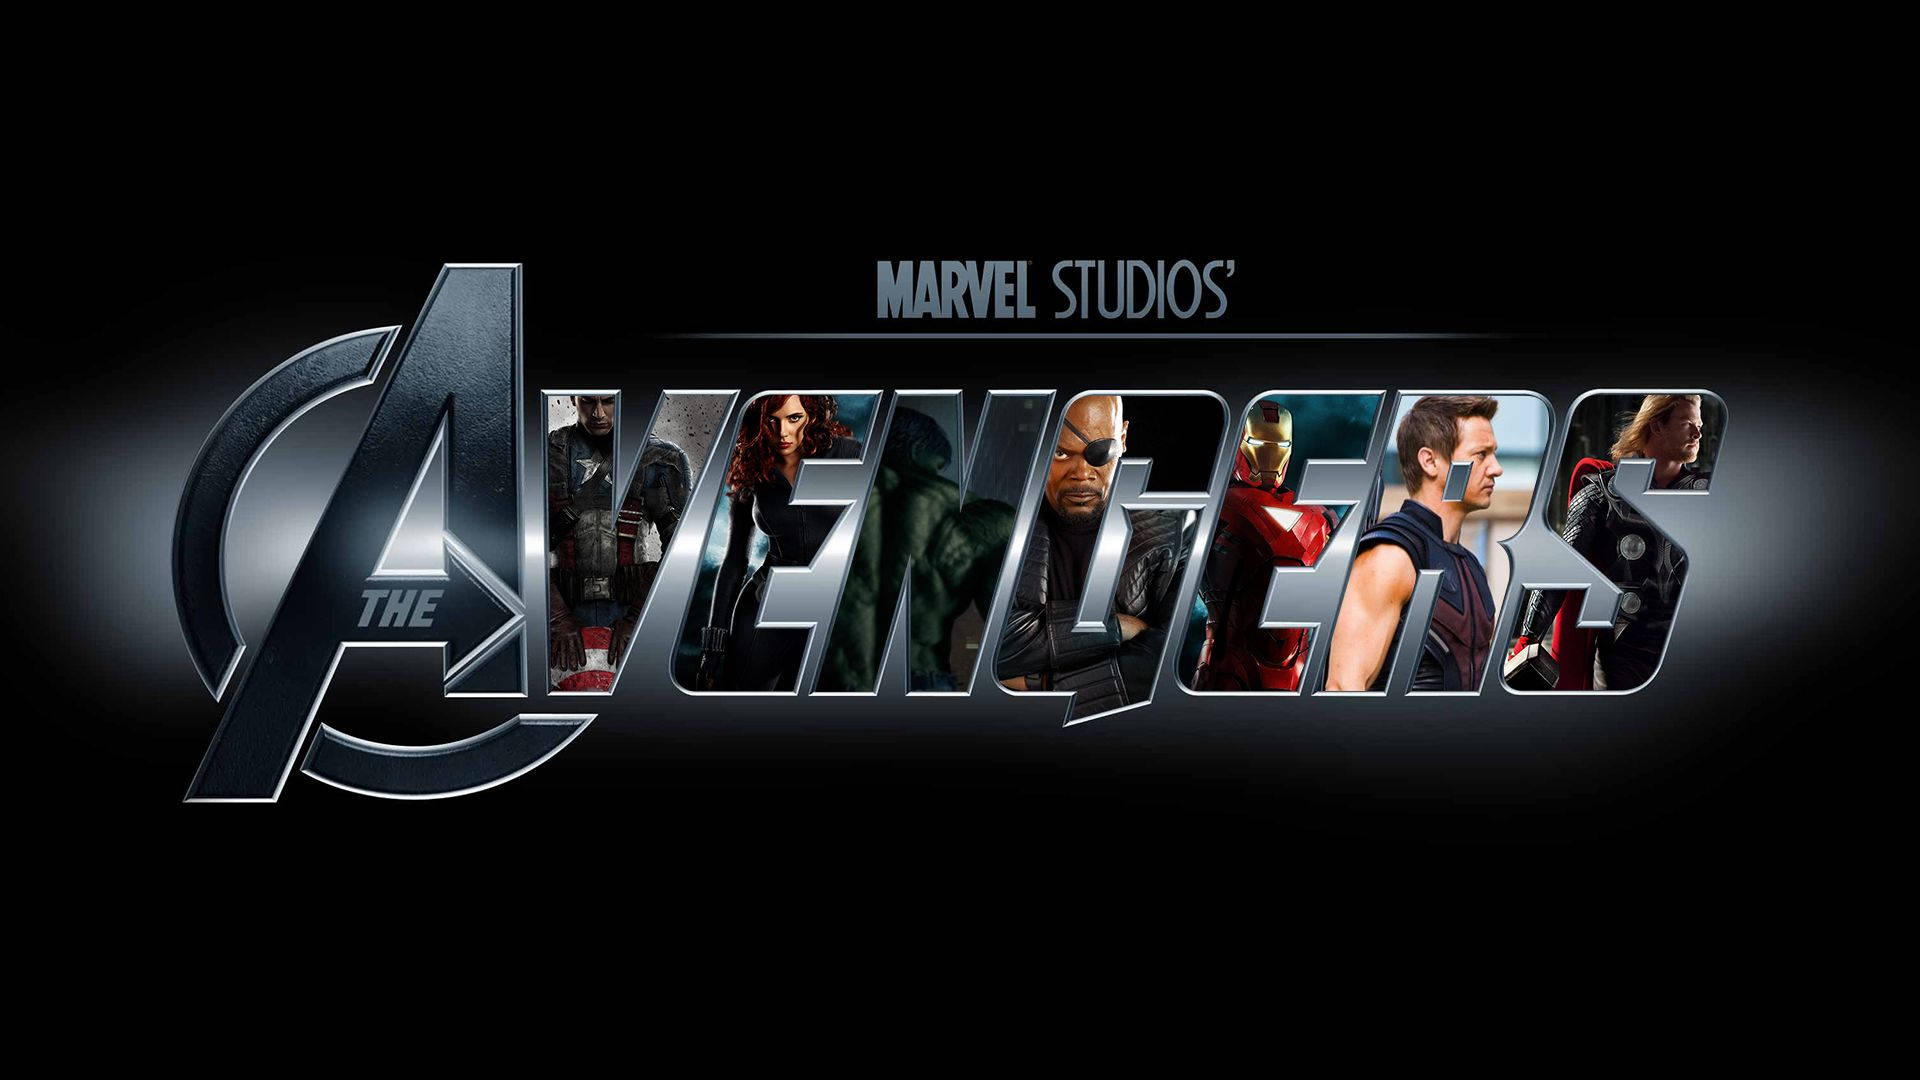 The Avengers Background